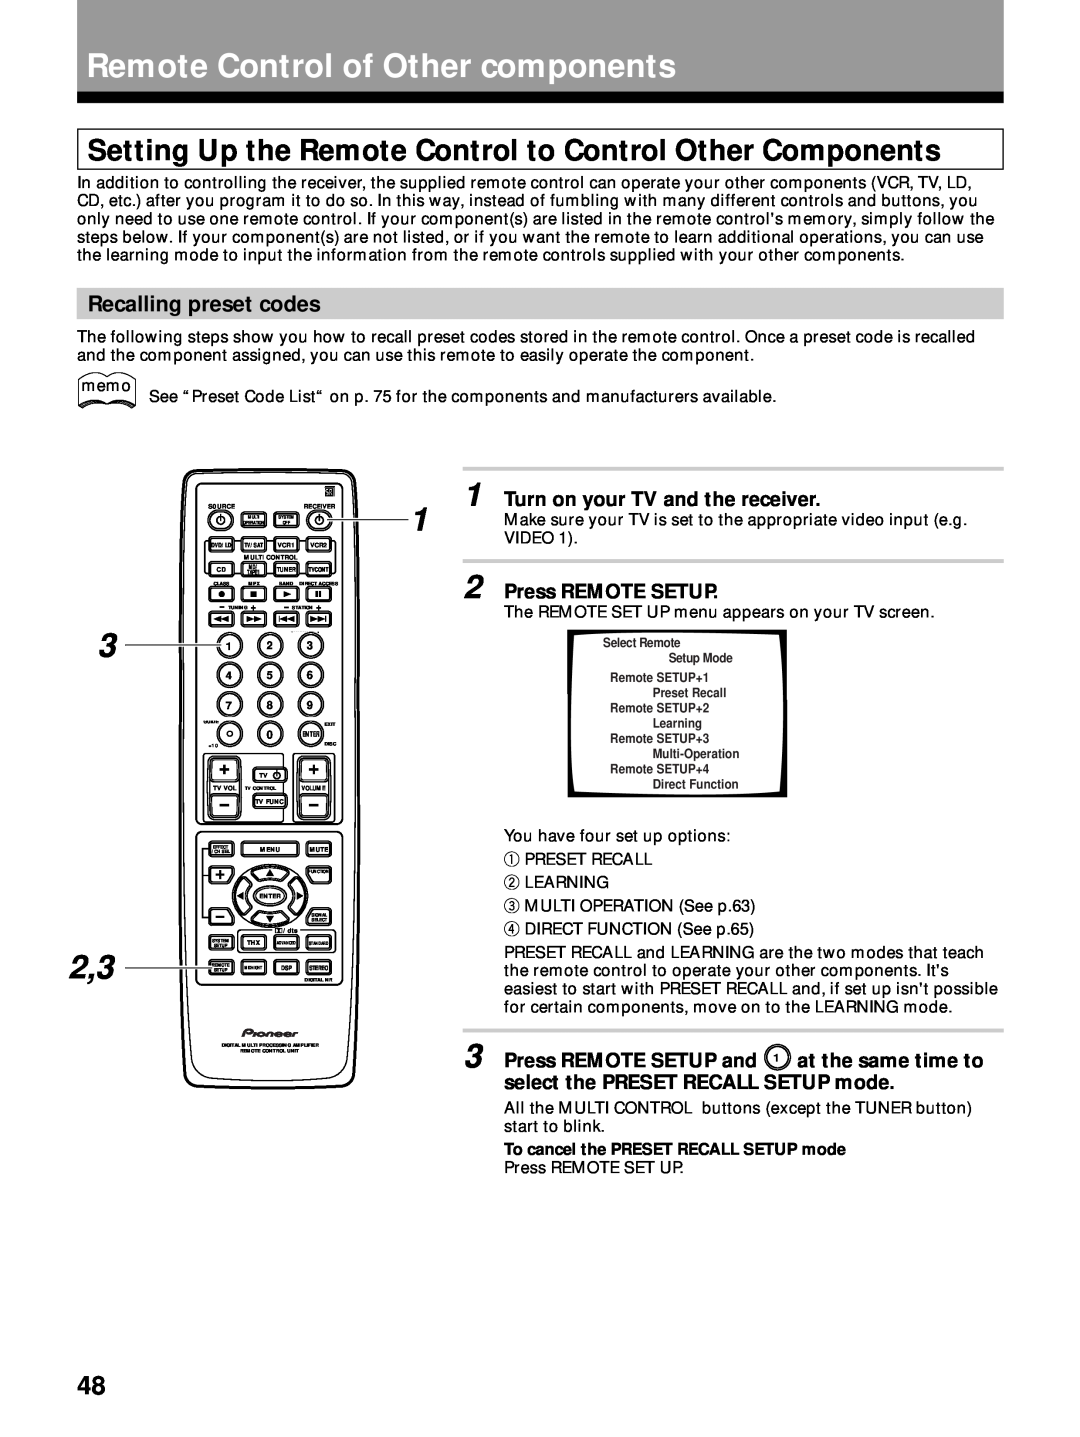 Pioneer VSX-27TX, VSX-26TX Remote Control of Other components, Recalling preset codes, Turn on your TV and the receiver 